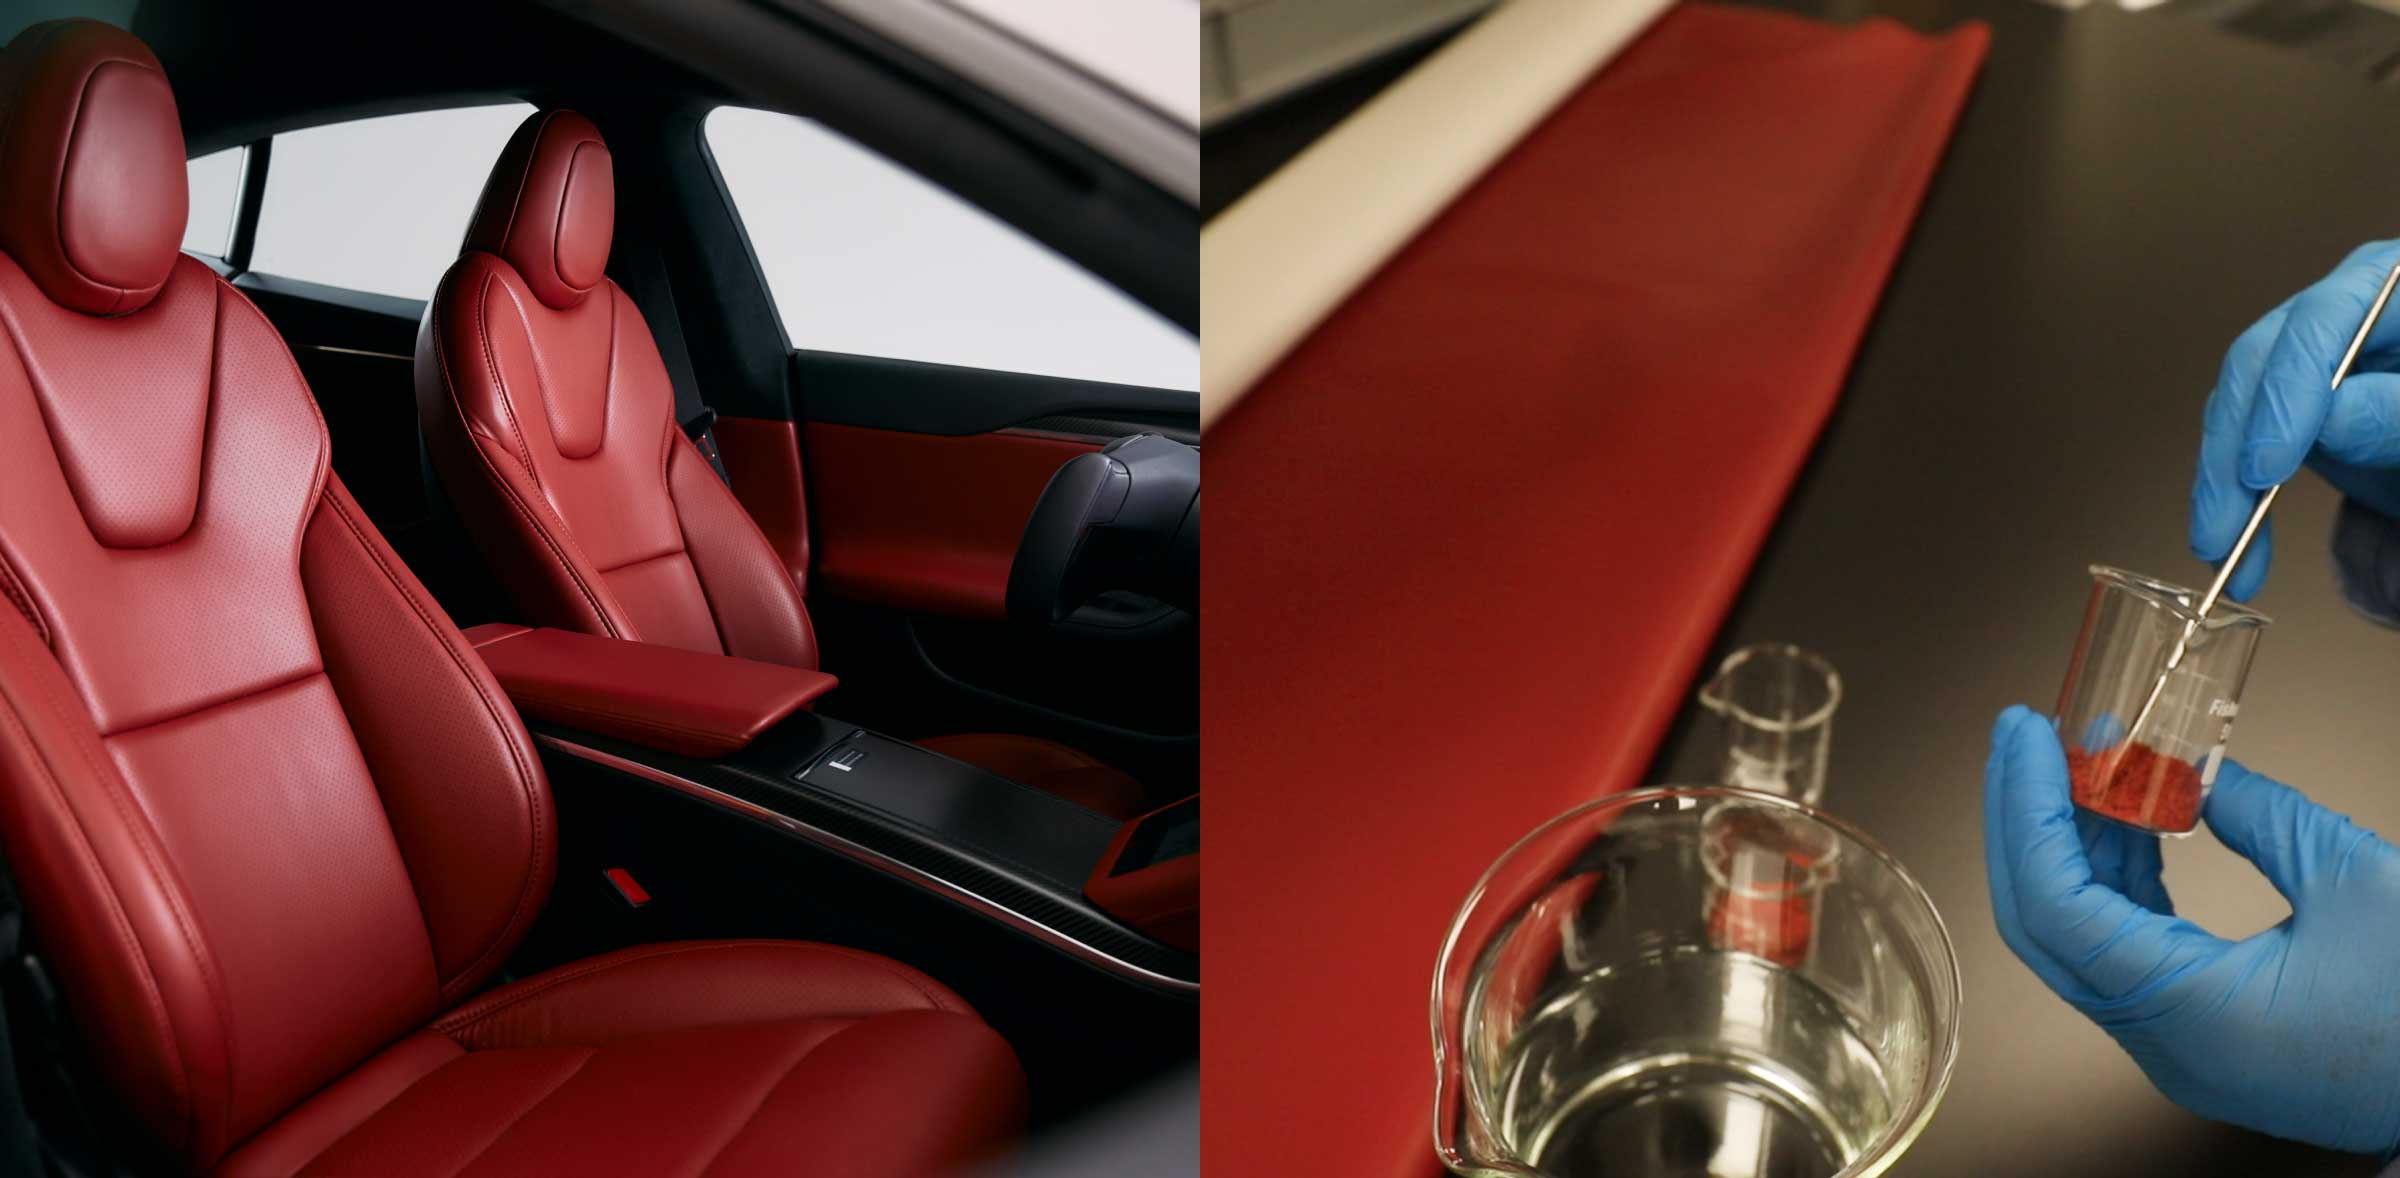 Image tiles: Serrano Red interior of a Tesla Model S, Chemist's hands mixing pigments in glass labware